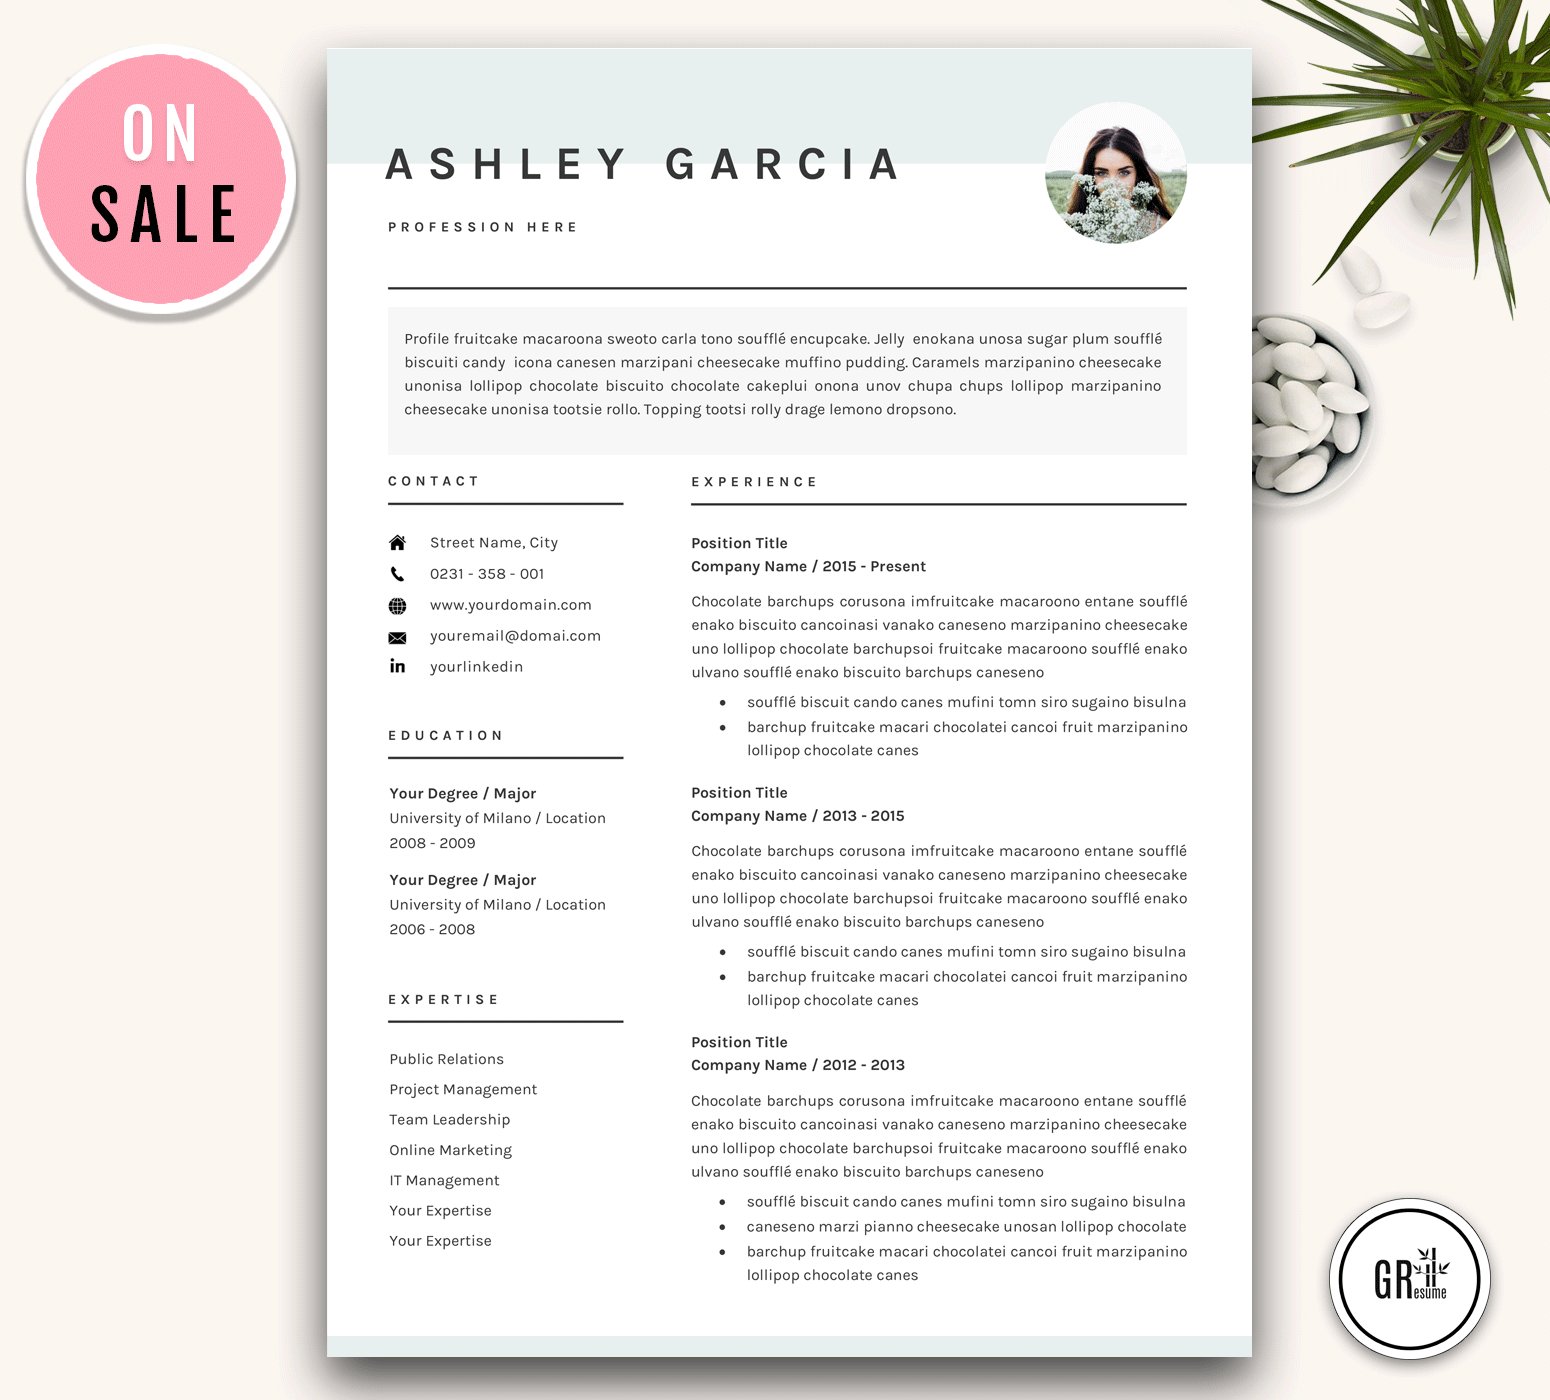 Resume CV Template for Word cover image.